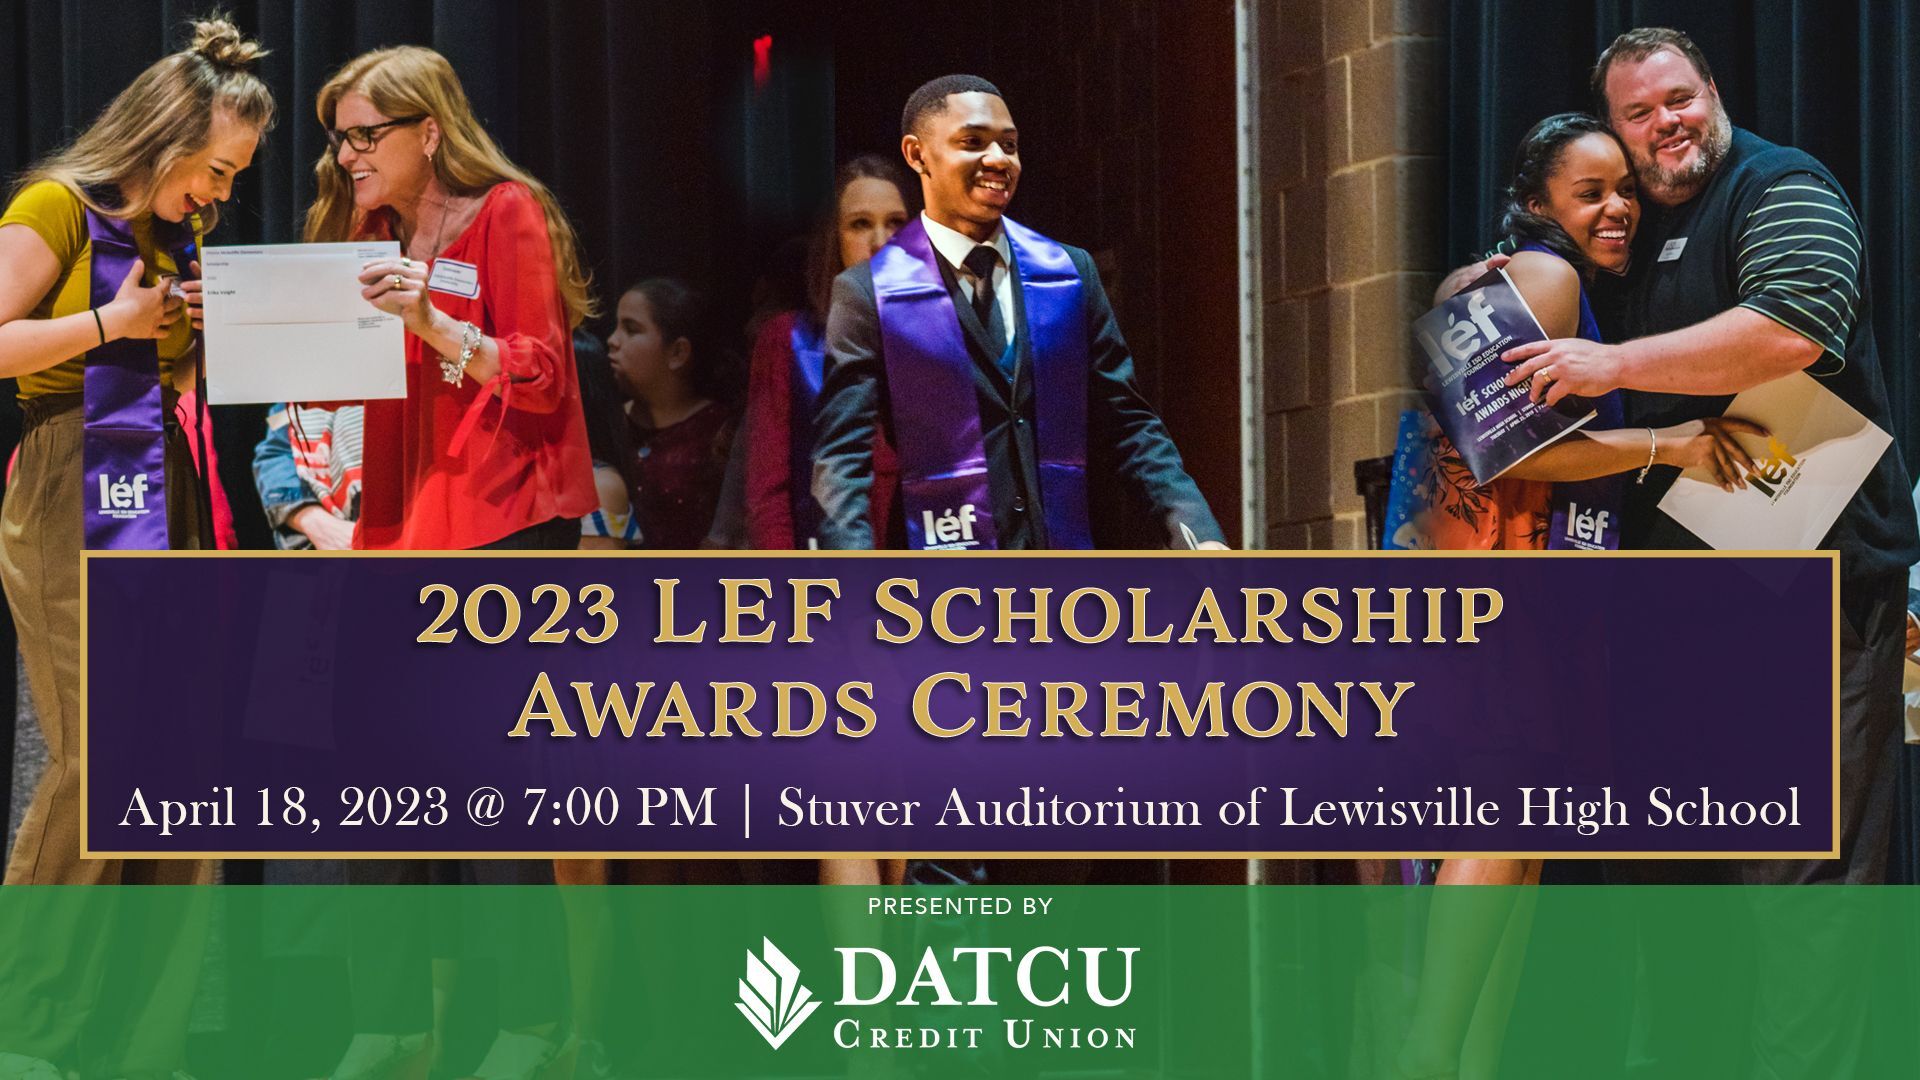 Save The Date for the 2023 Scholarship Awards Ceremony on April 18, 2023